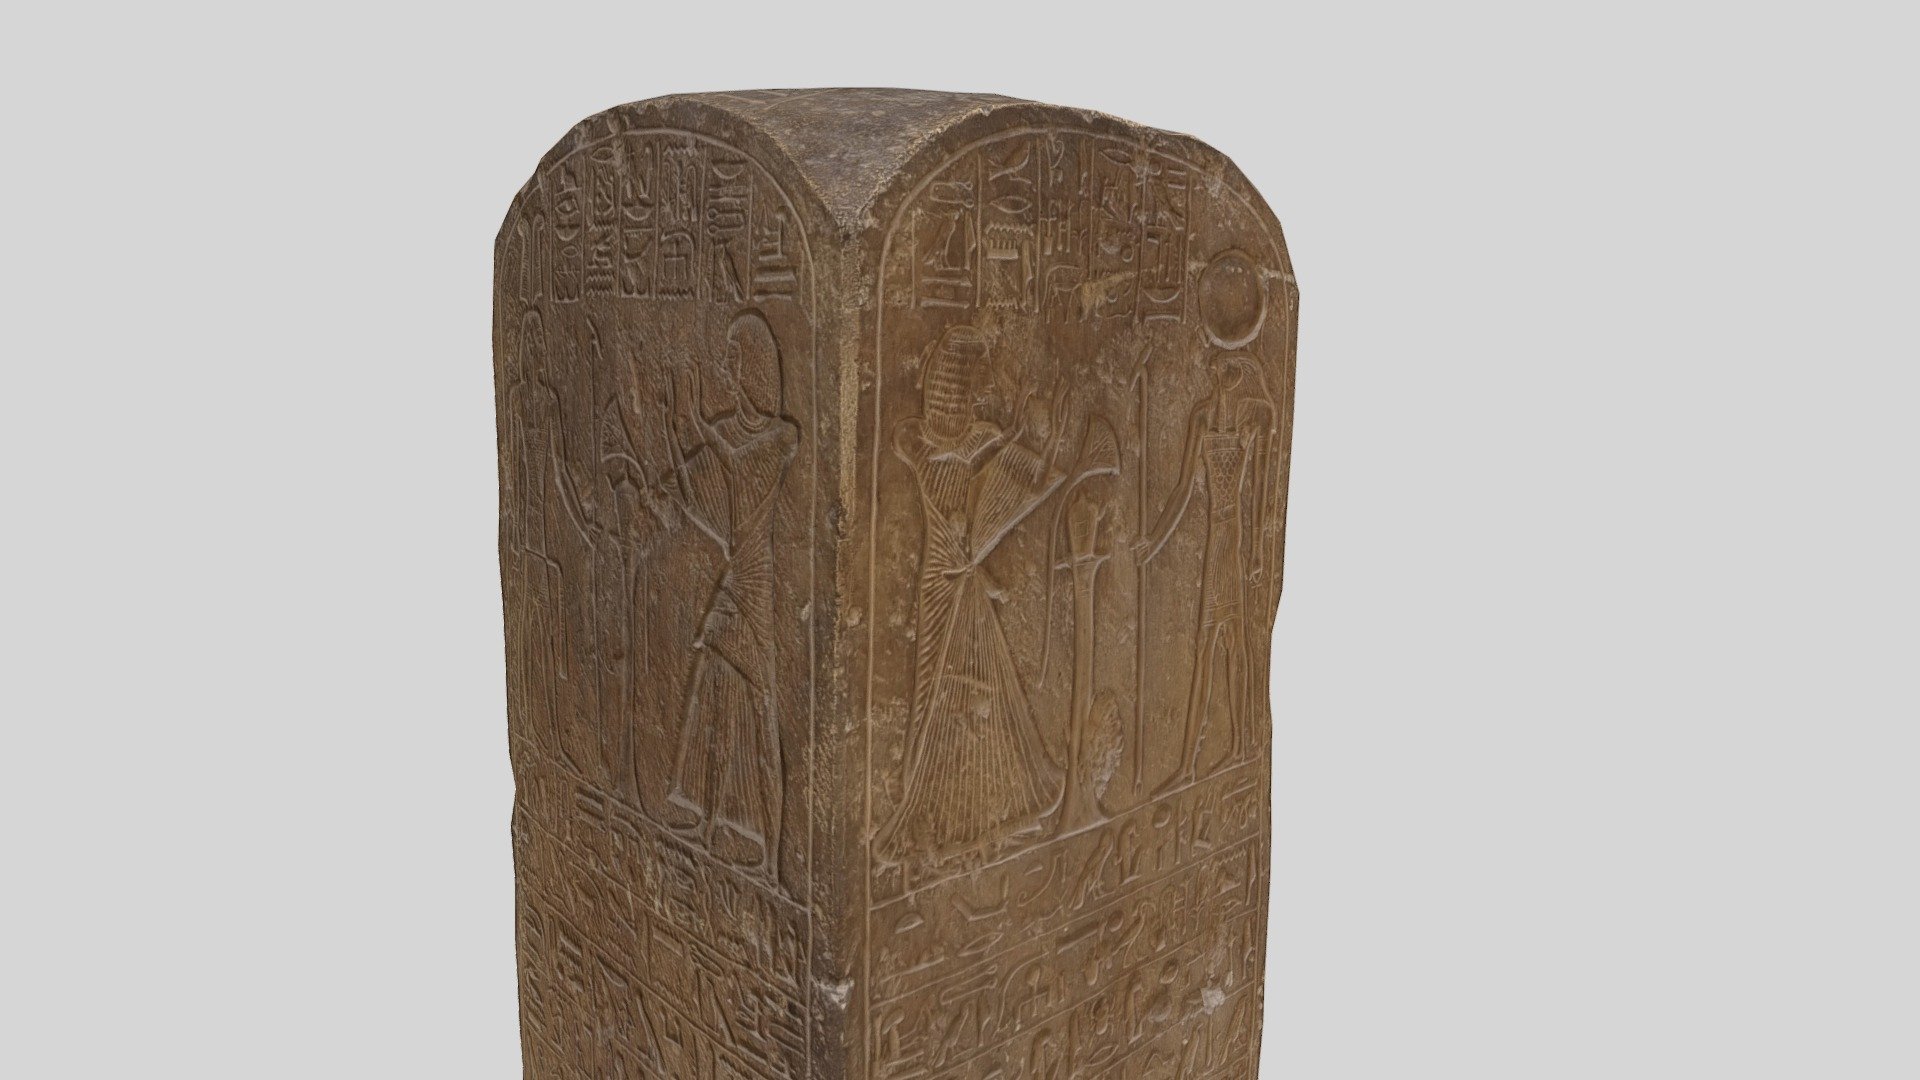 Scan of Egyptian Stele - Cairo Museum